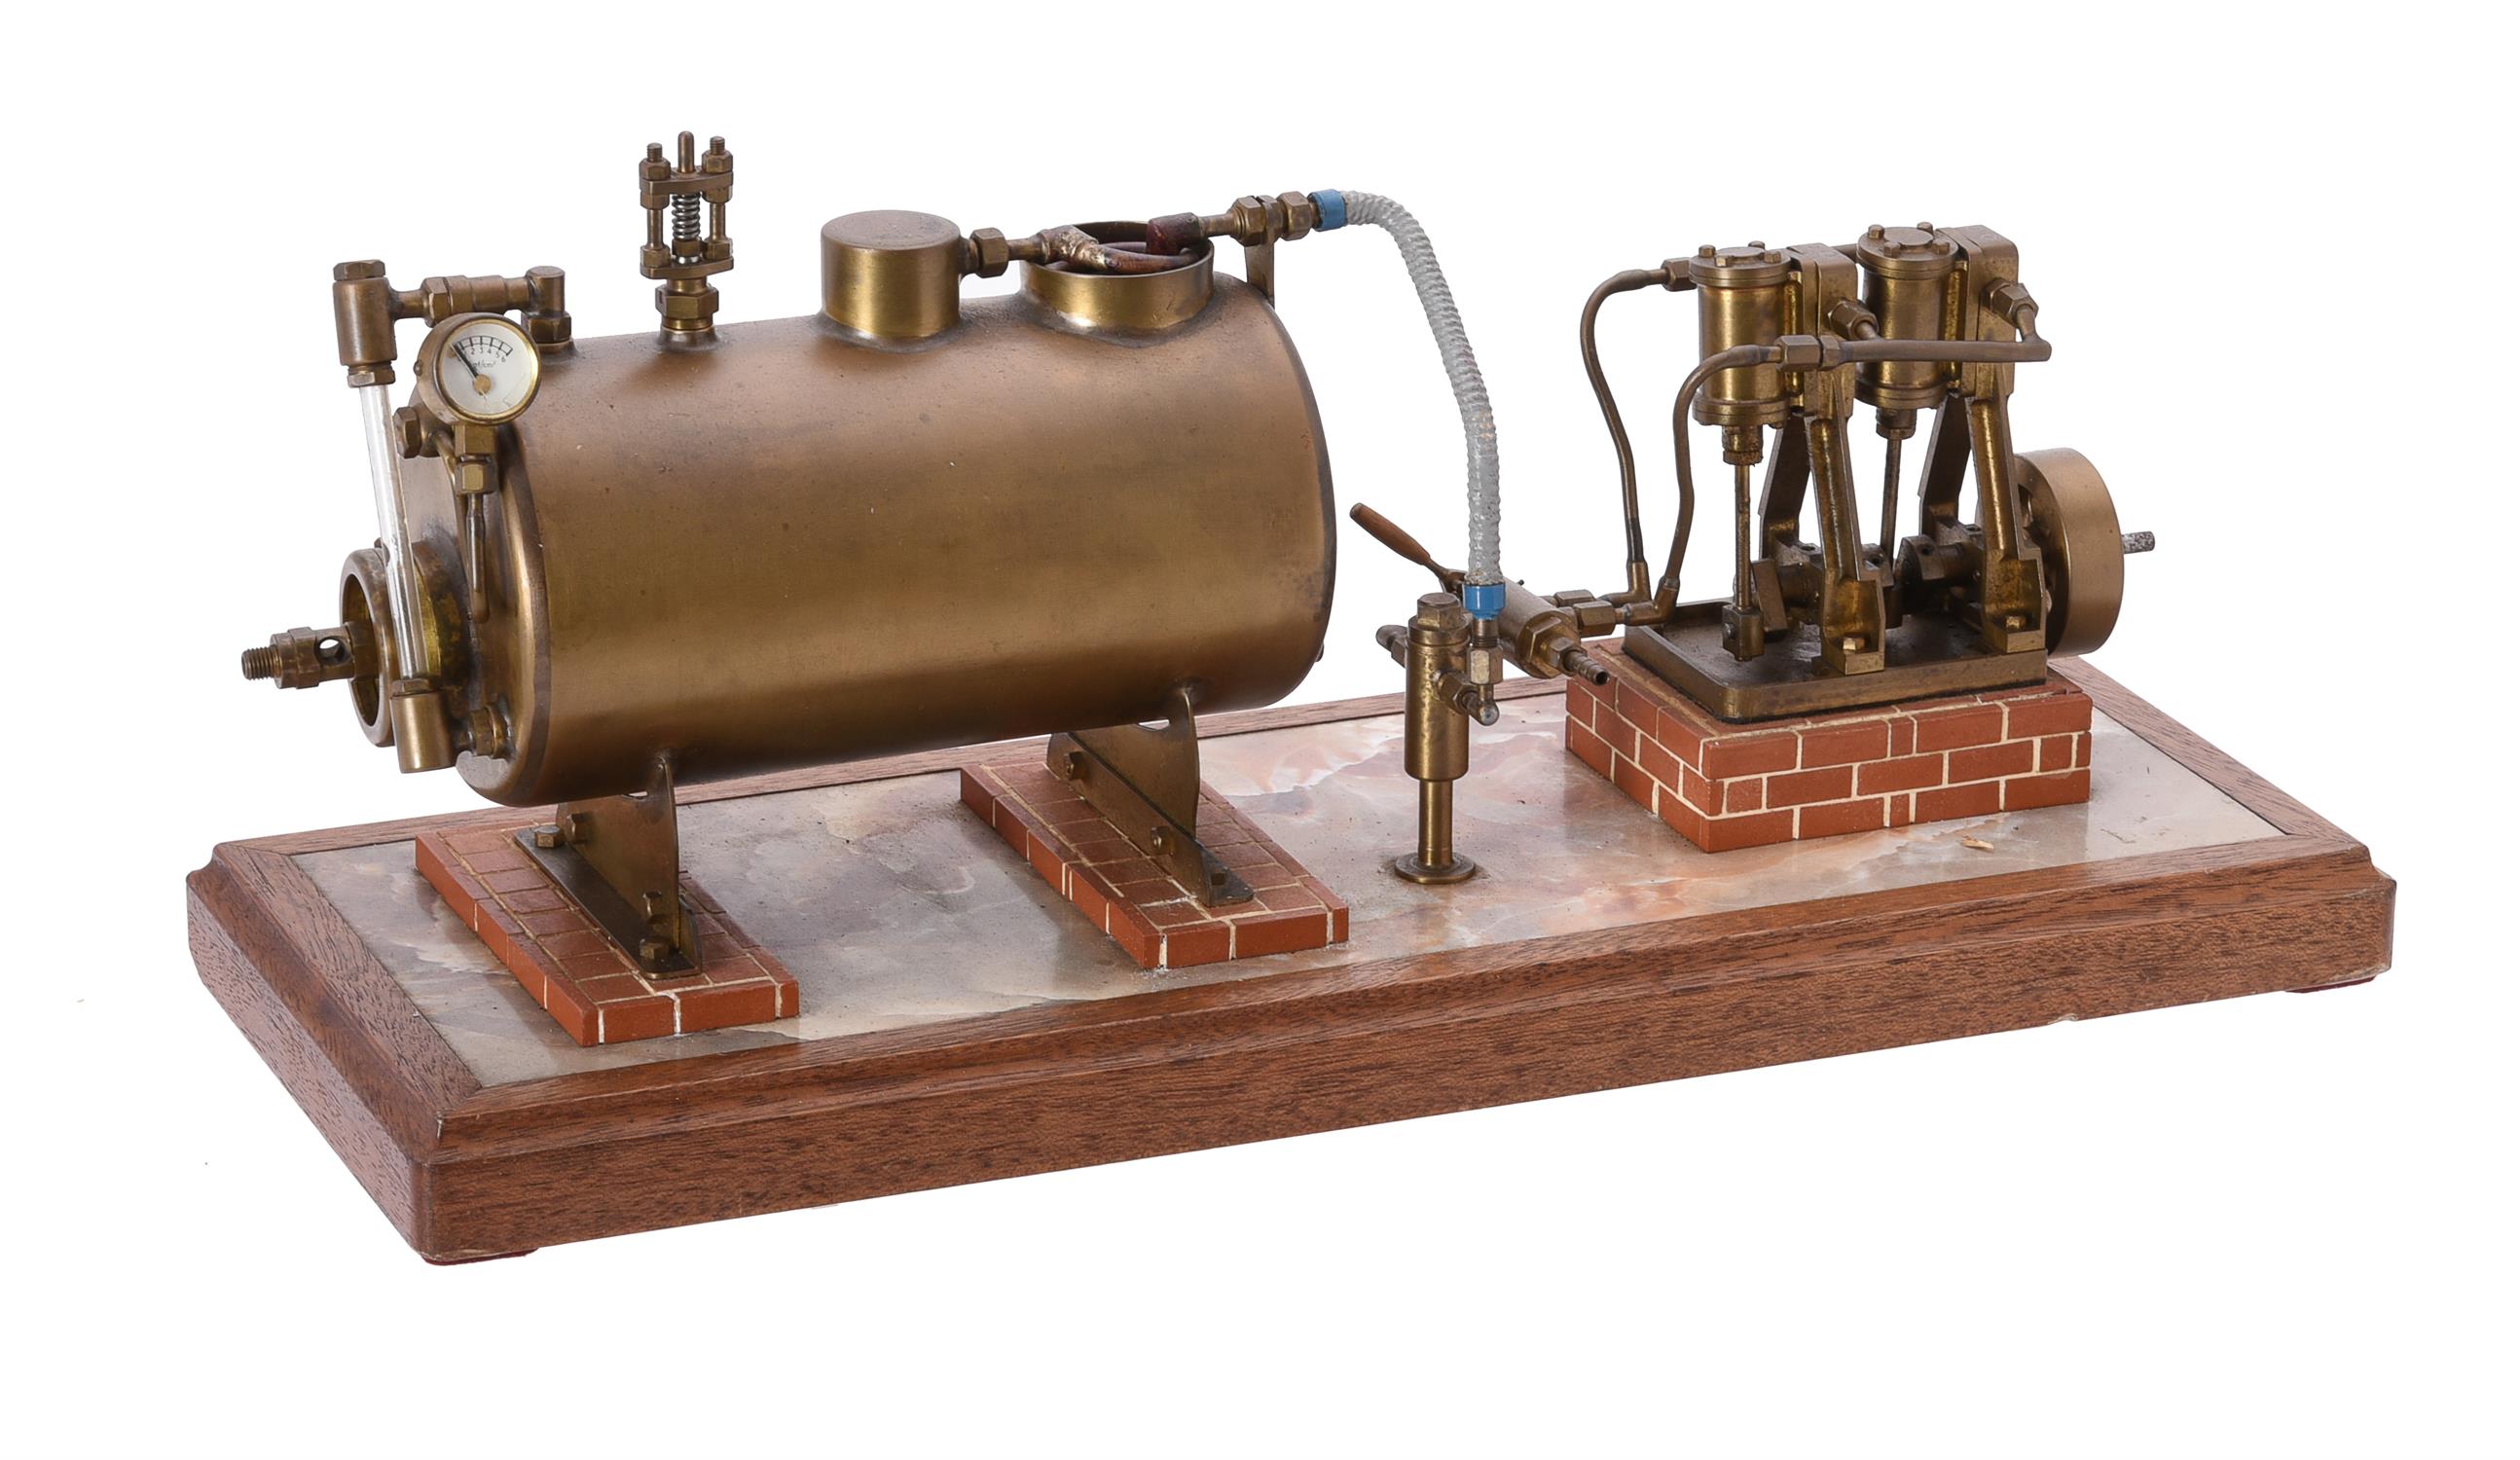 A well engineered model of a twin oscillating vertical steam engine